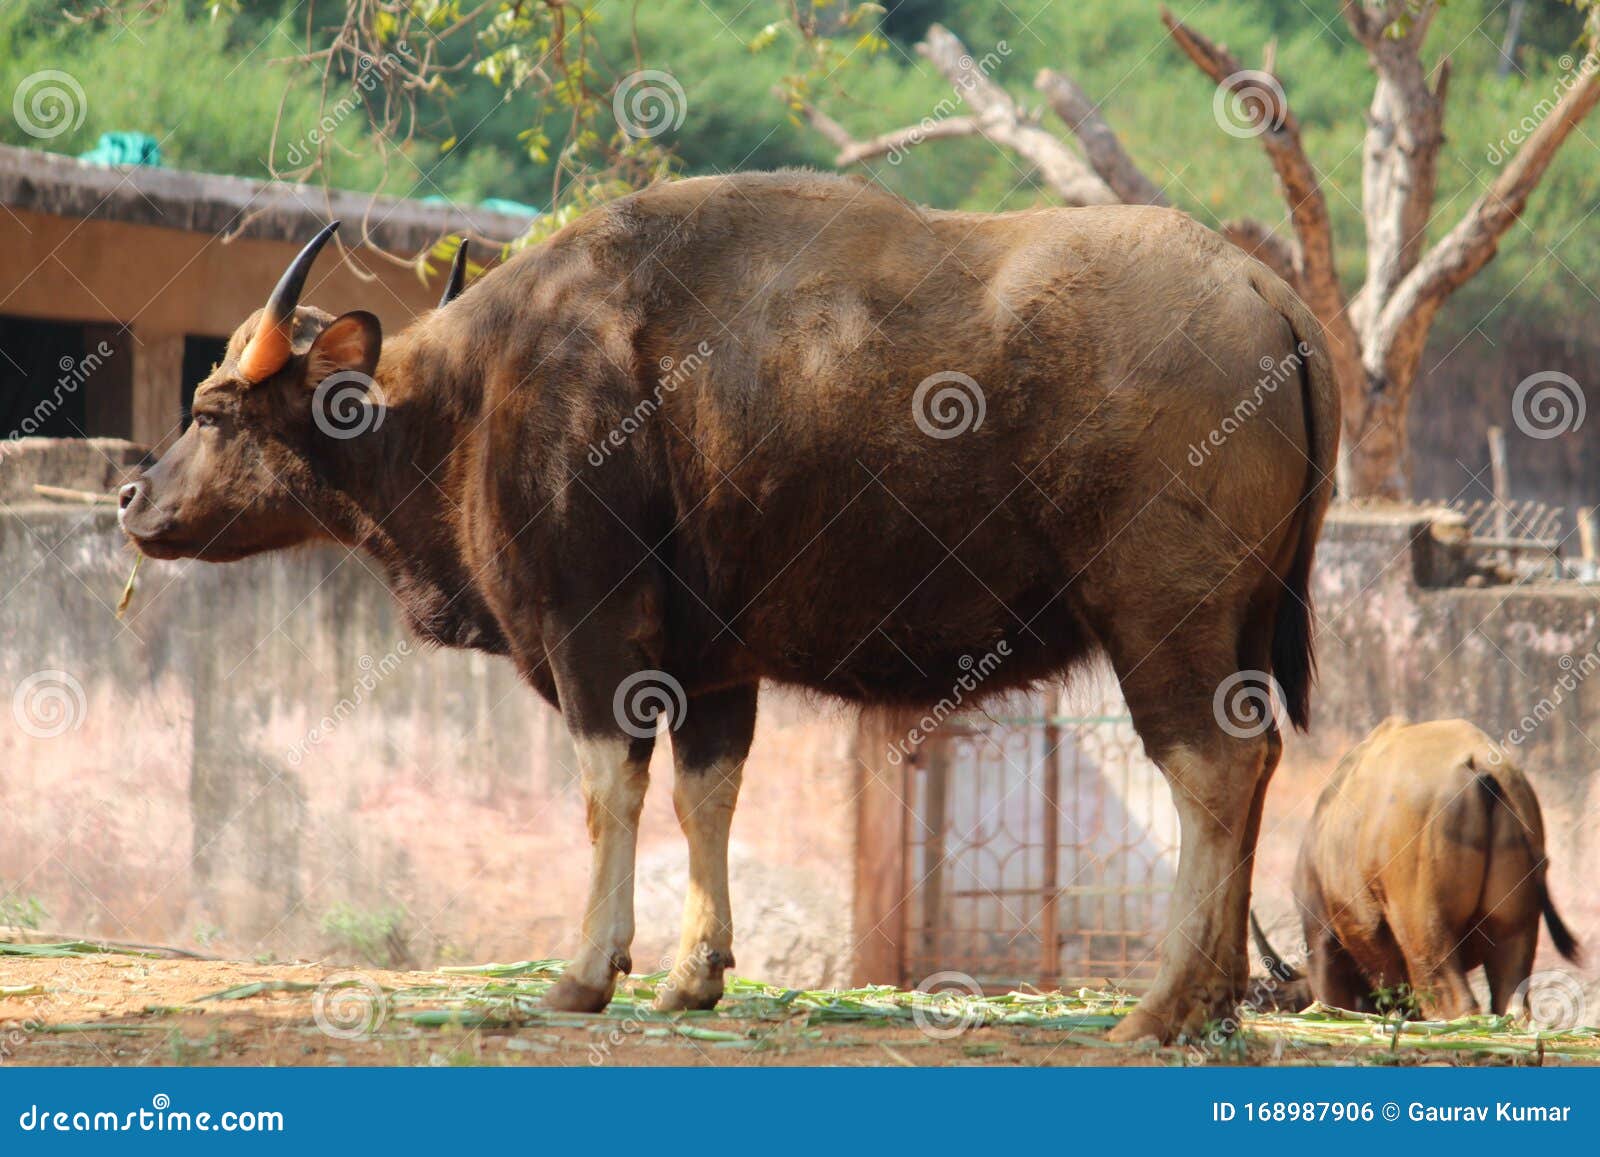 forest buffalo in indira gandhi zoological park